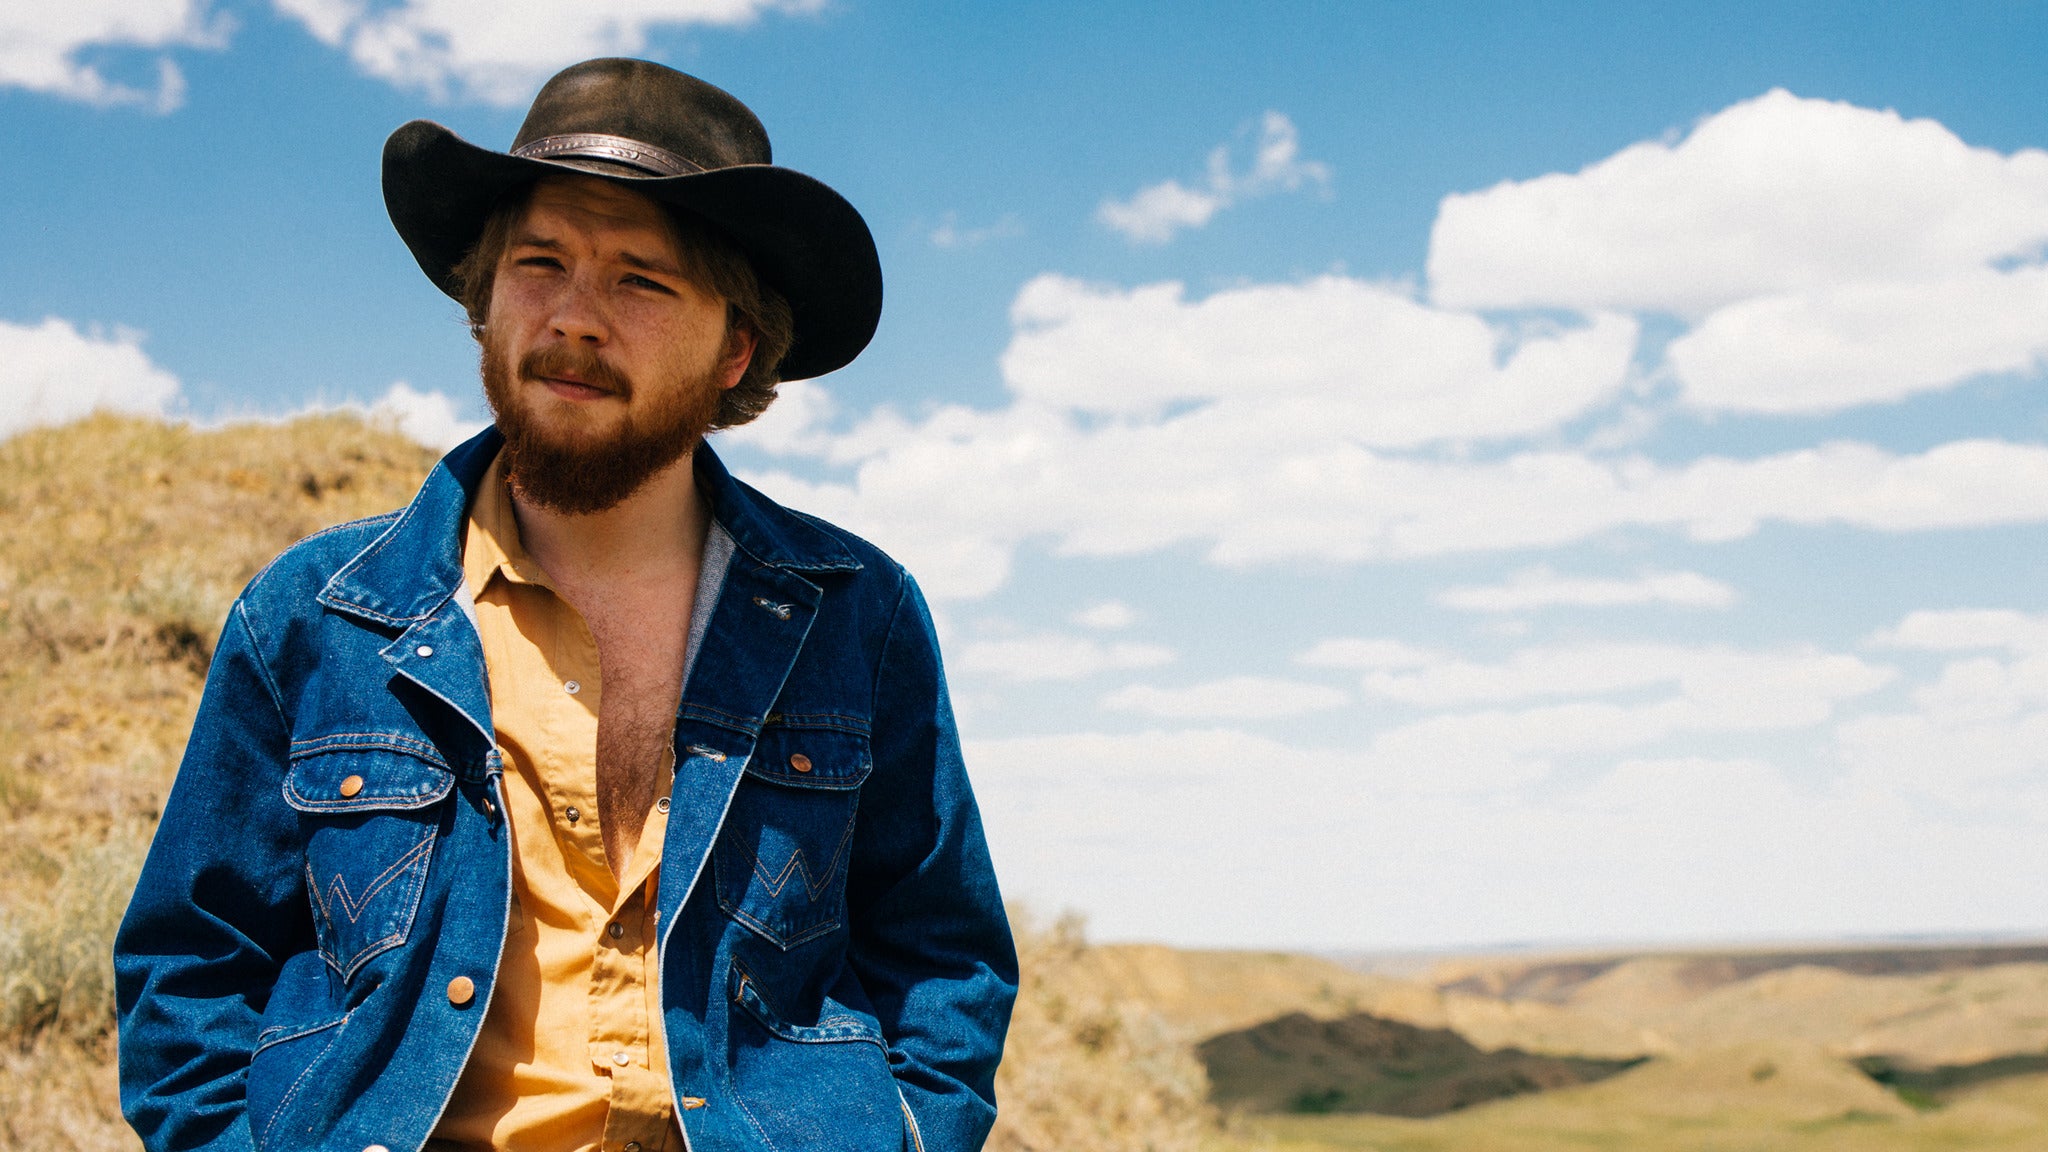 Colter Wall in New York promo photo for Live Nation presale offer code